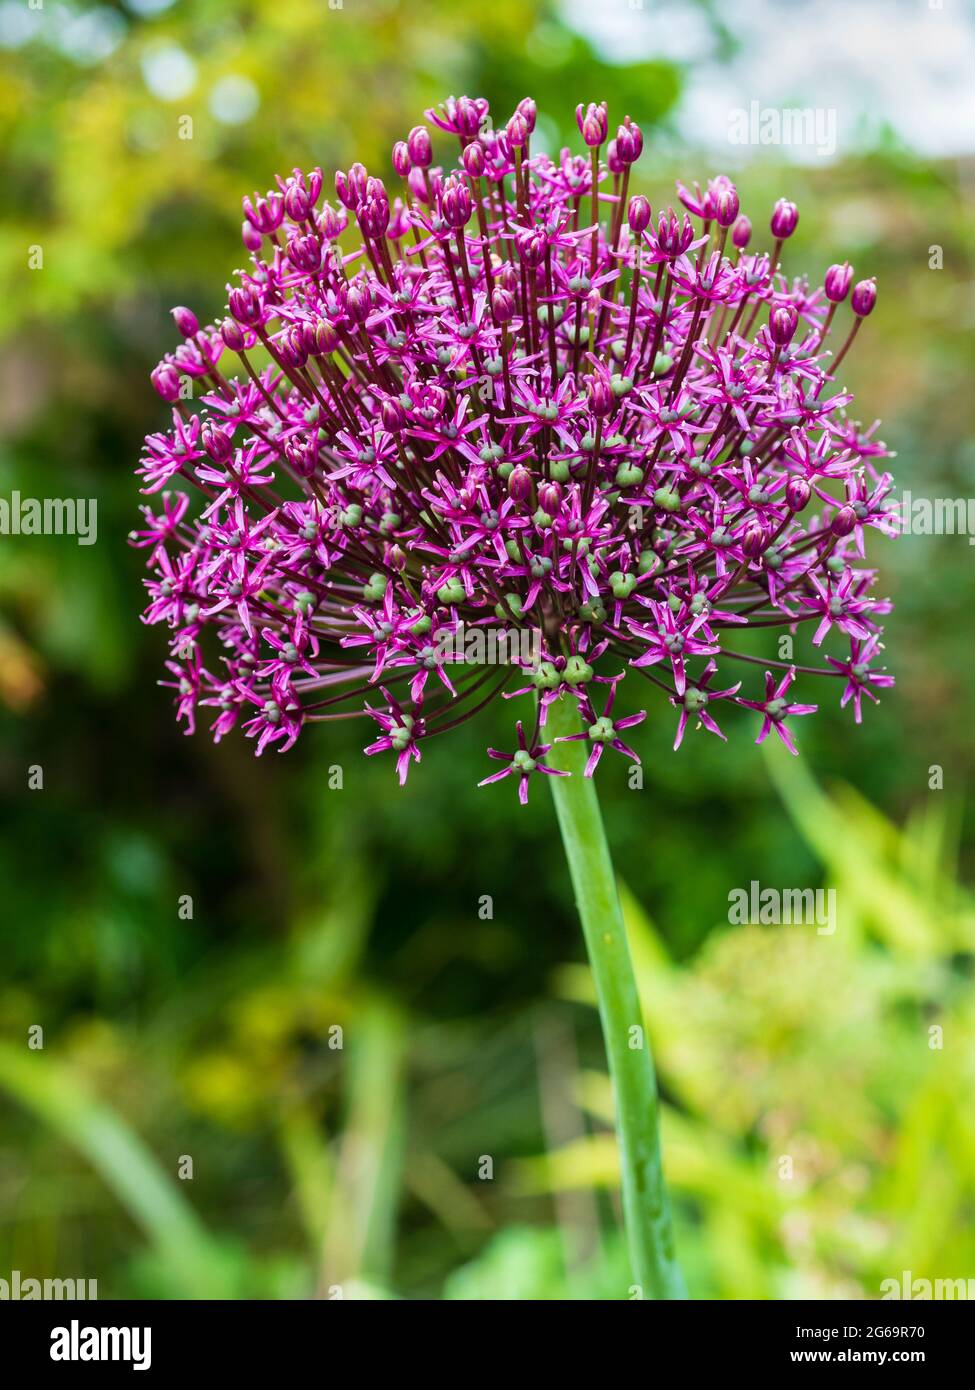 Inverted bowl shaped flower heads of the hardy, early summer flowering ornamental onion, Allium 'Miami' Stock Photo